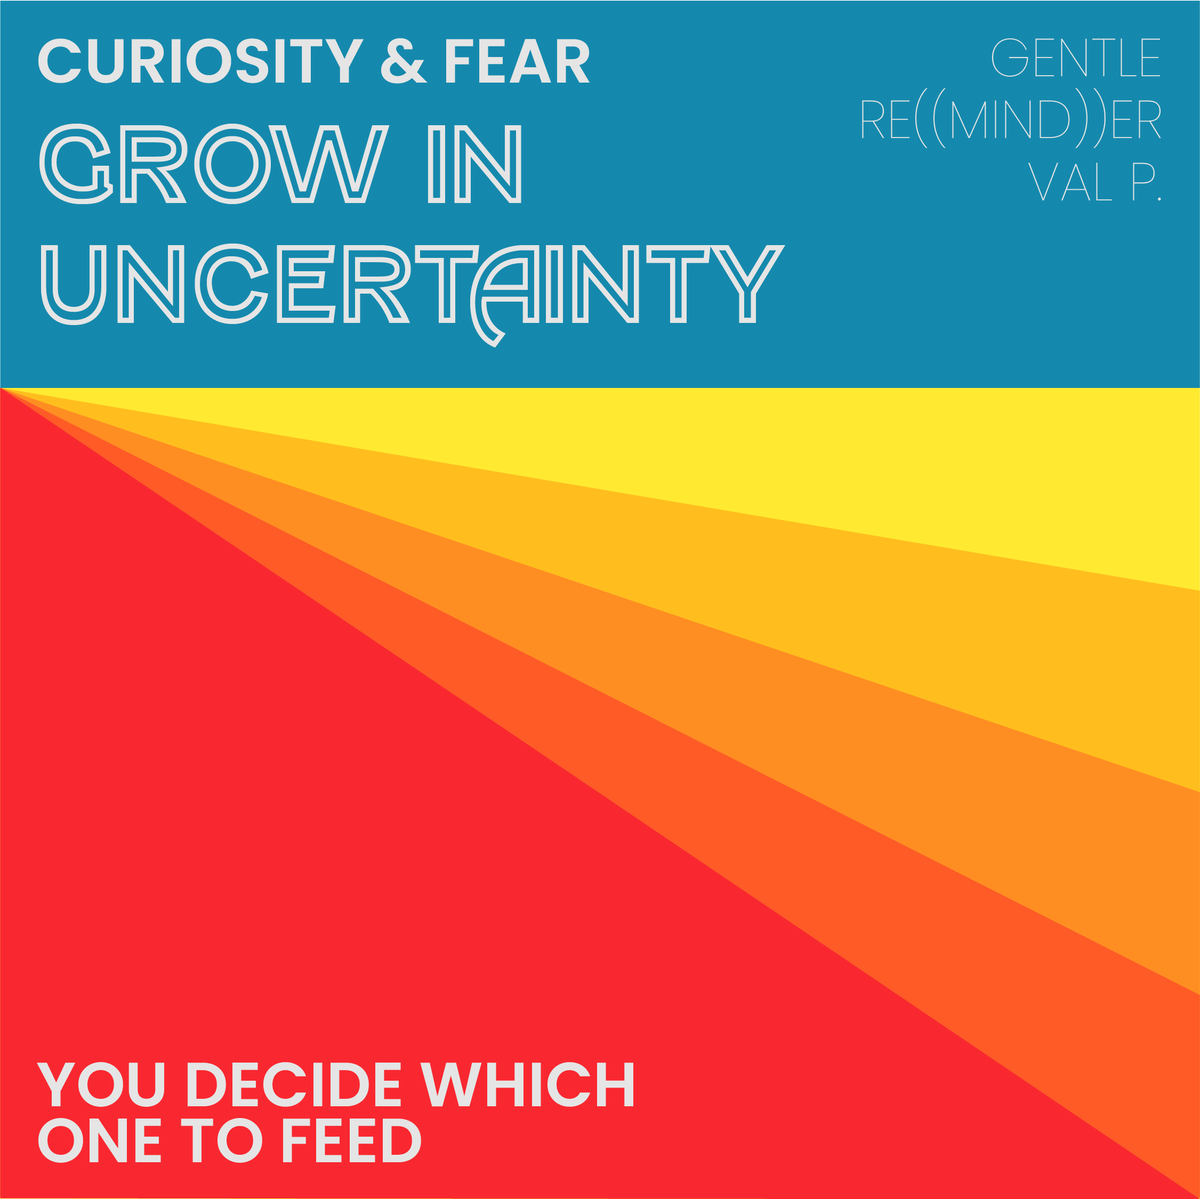 Curiosity and fear grow in uncertainty. You decided which one to feed.